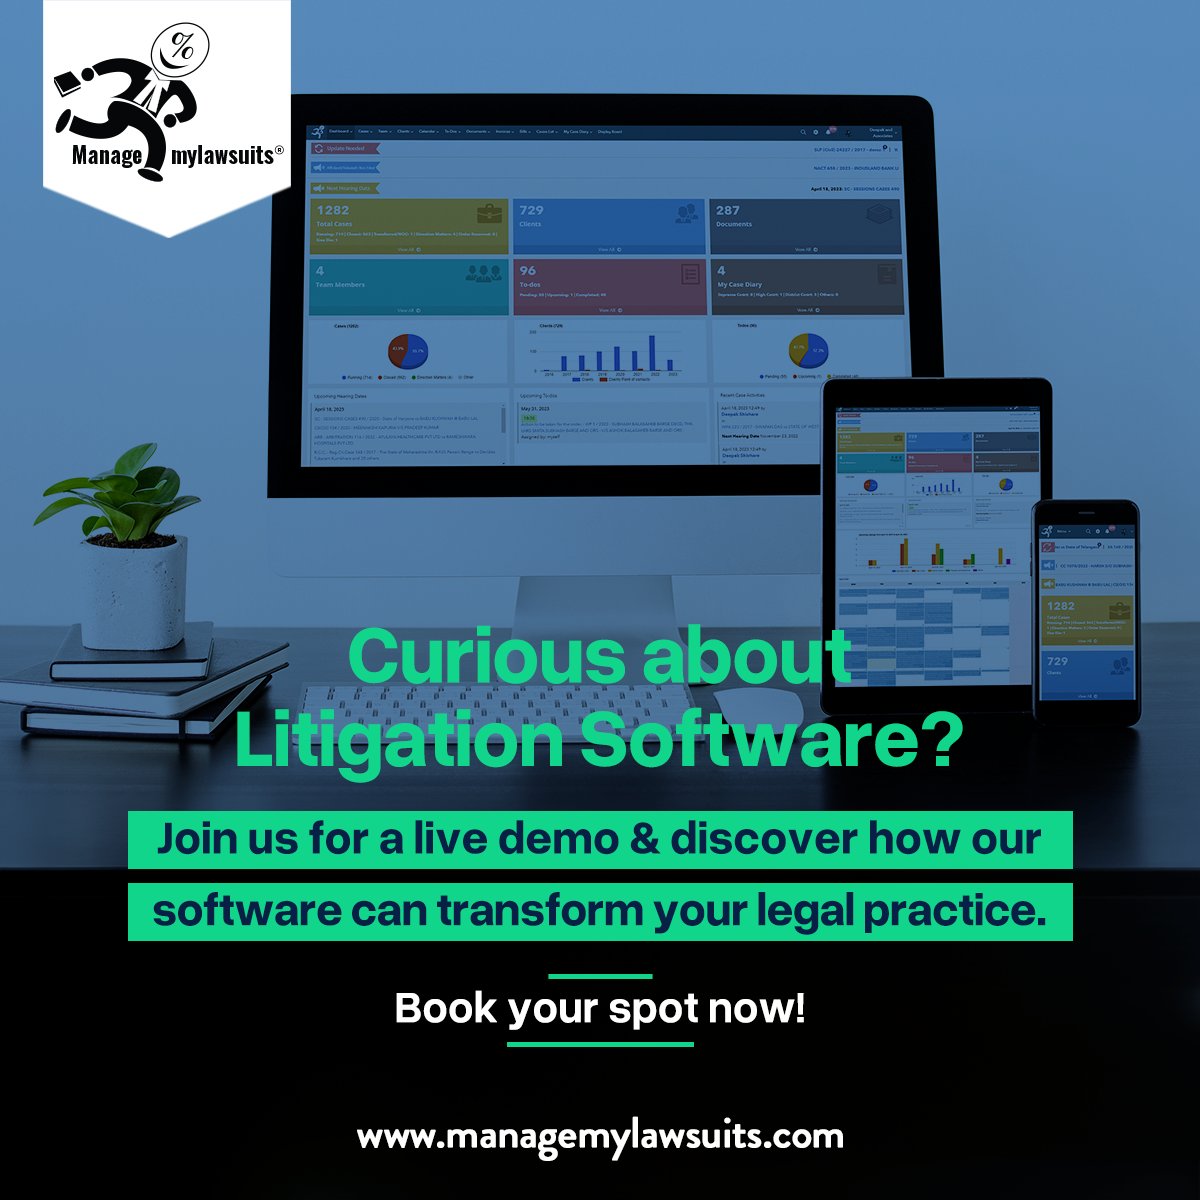 Experience the power of litigation software like never before! Join us for an exclusive live demo and witness firsthand how ManageMyLawsuits can take your legal practice to new heights.

Book your spot now to discover the future of legal management!